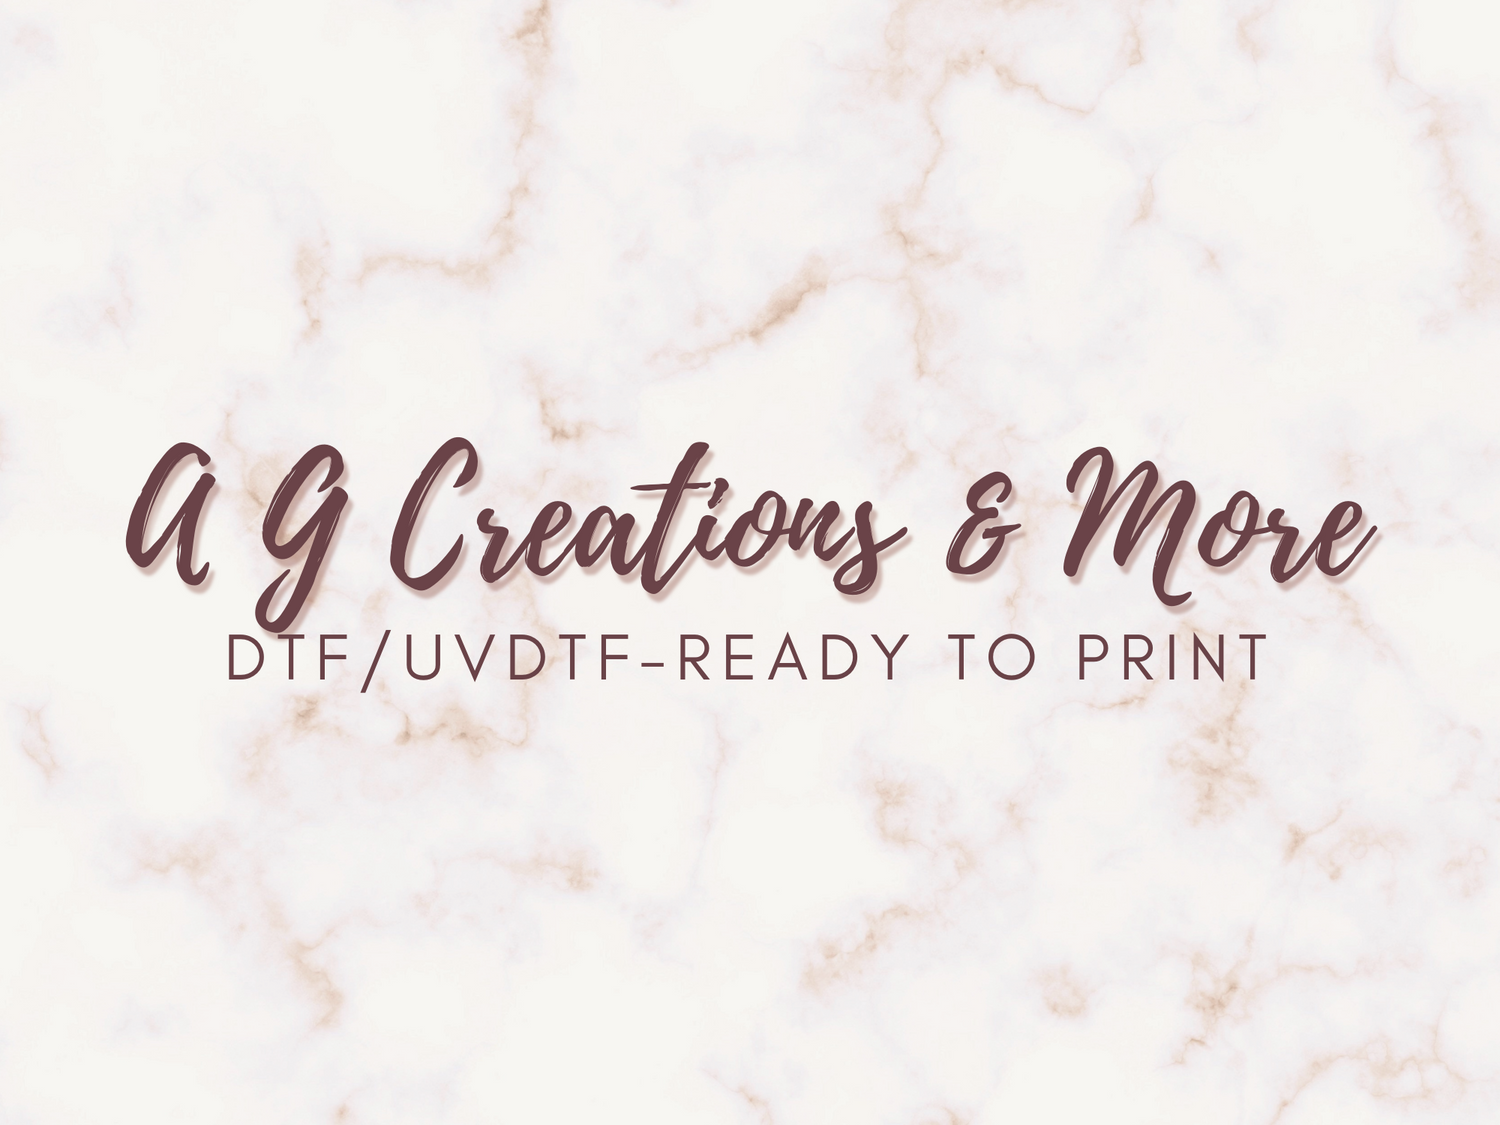 A G CREATIONS & MORE